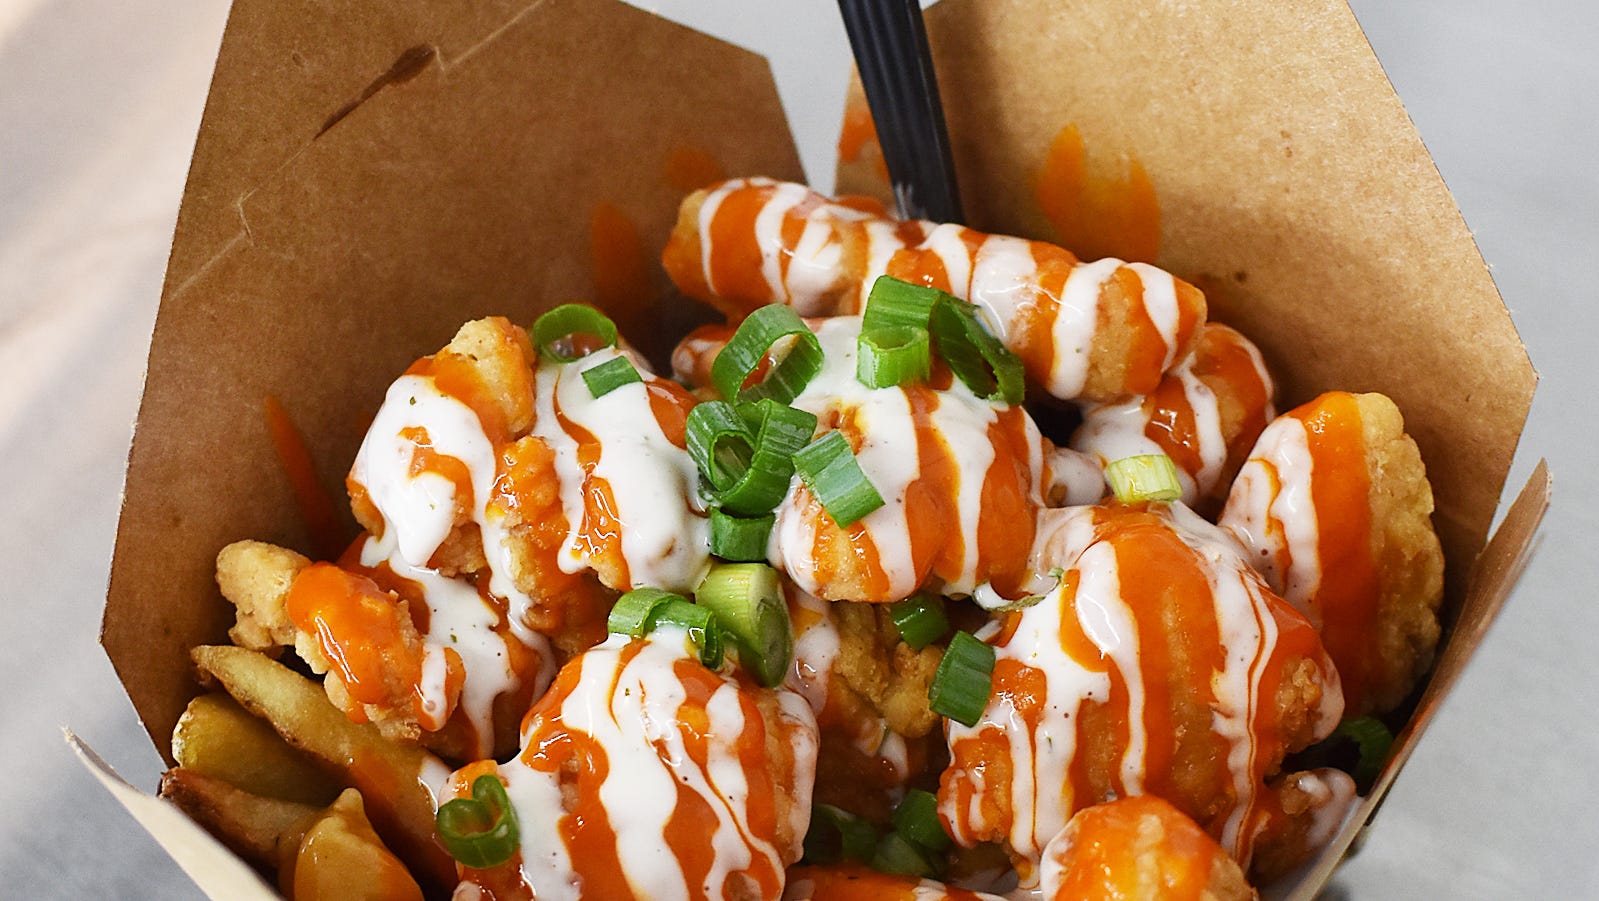 Love loaded fries? Check out Fall River's new poutine food truck